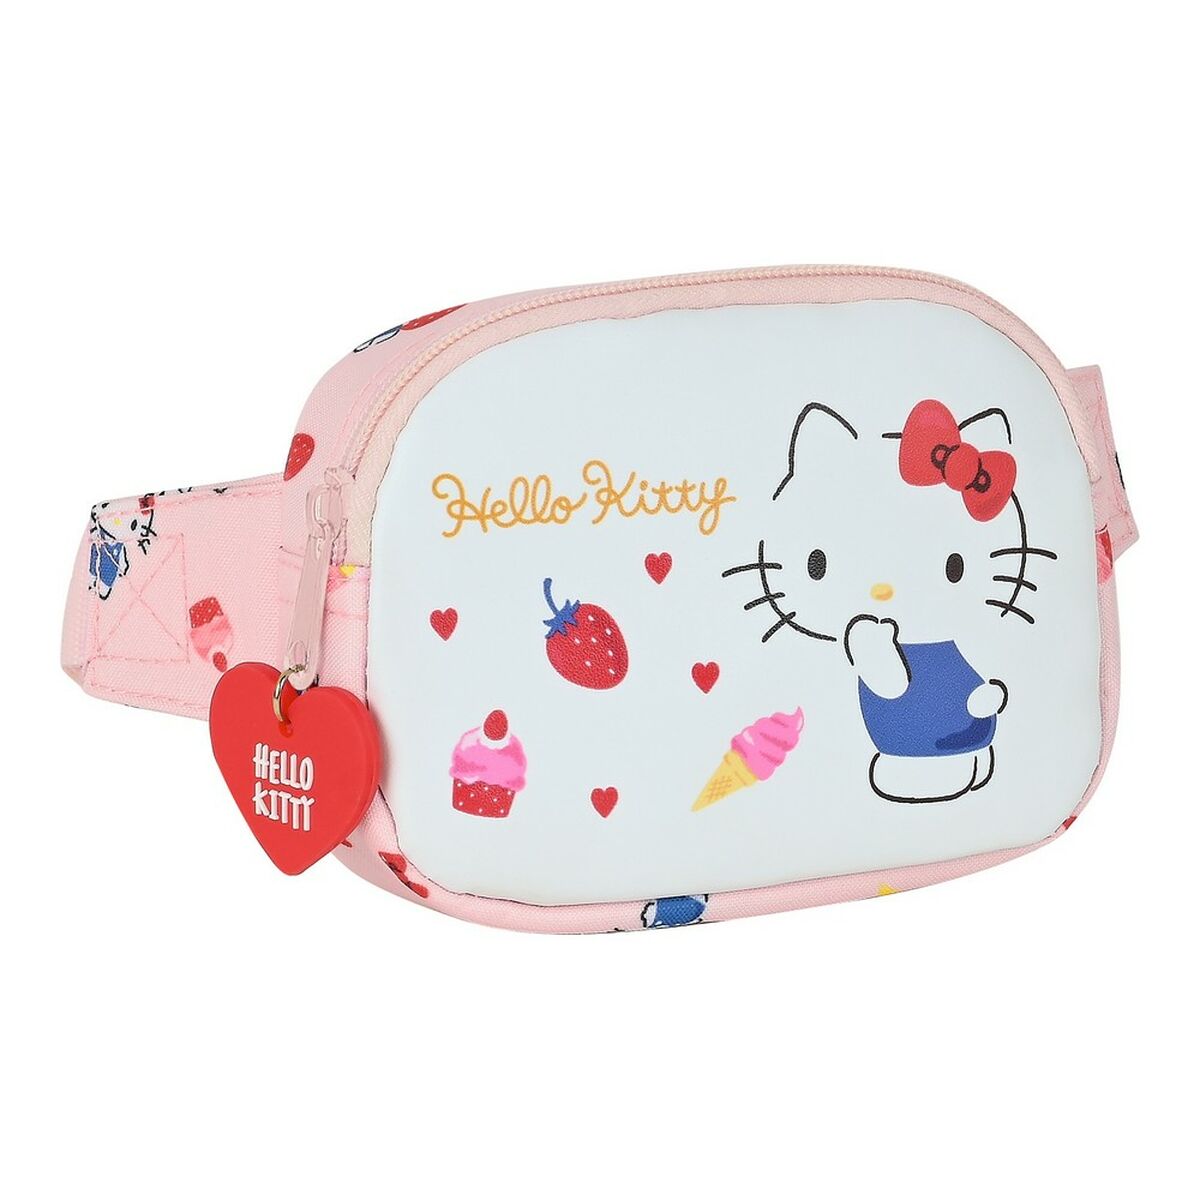 Belt Pouch Hello Kitty Happiness girl Pink White (14 x 11 x 4 cm)